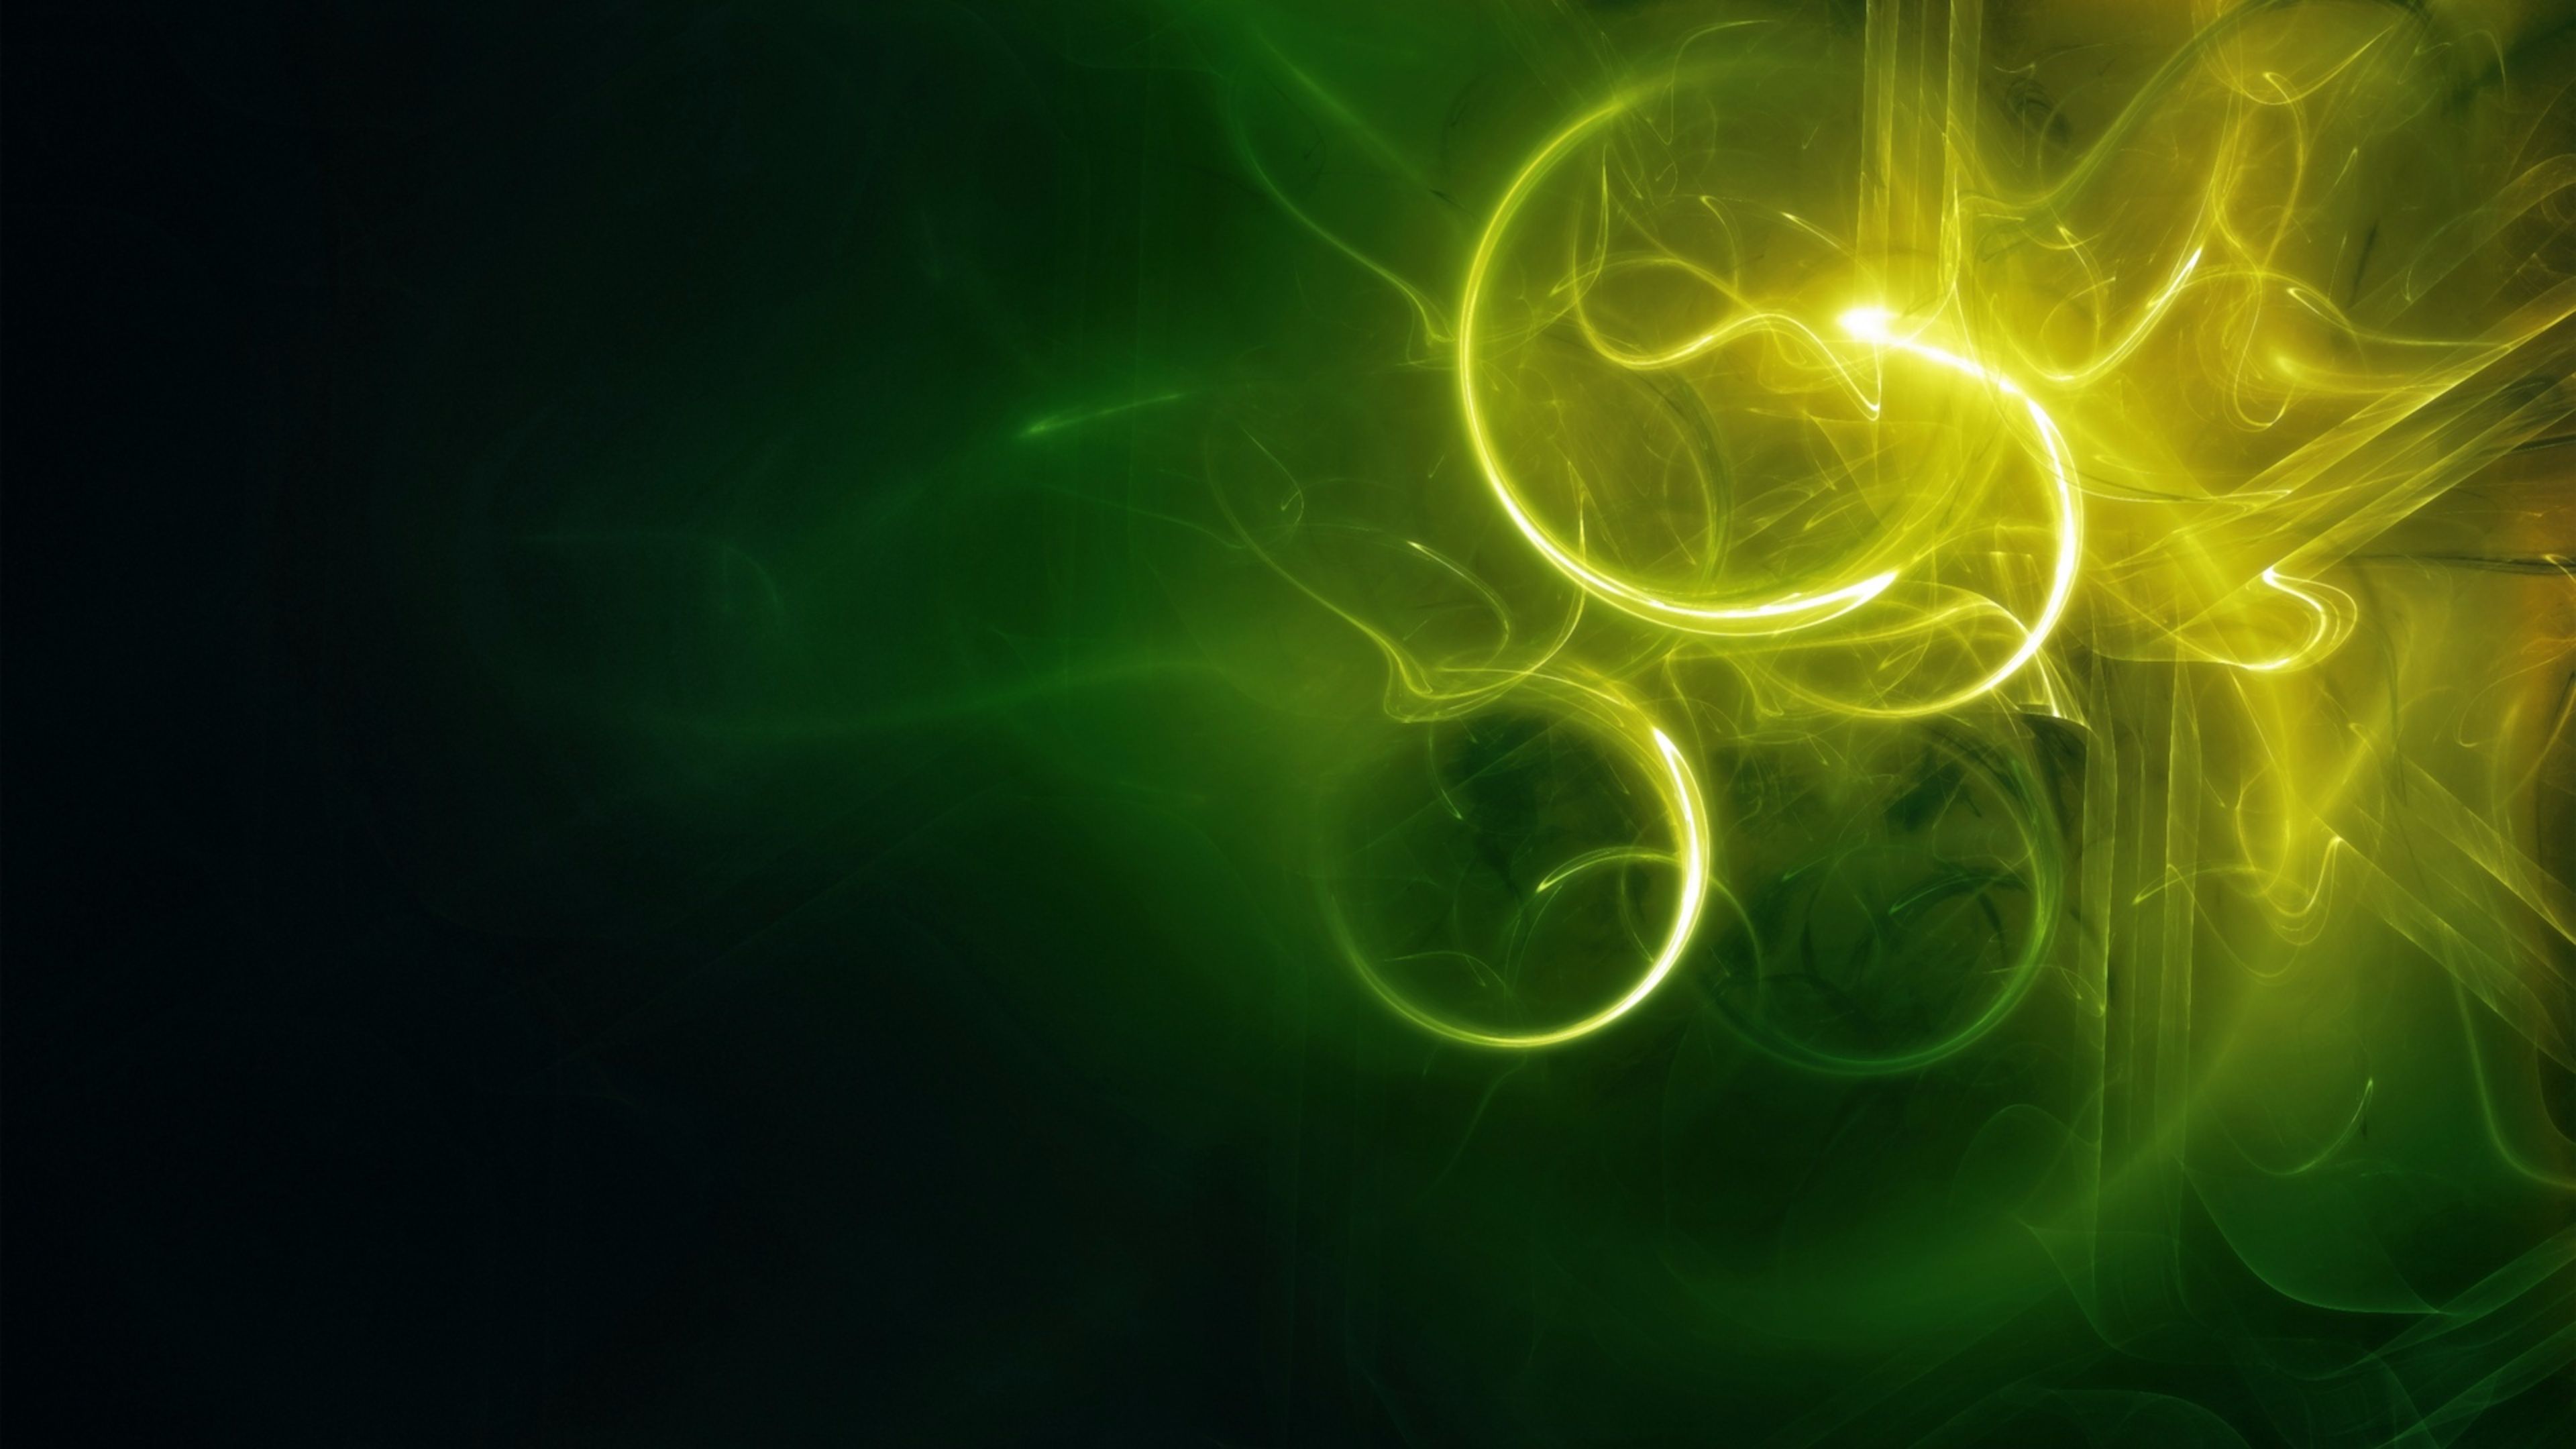 Green & Gold Abstract Backgrounds